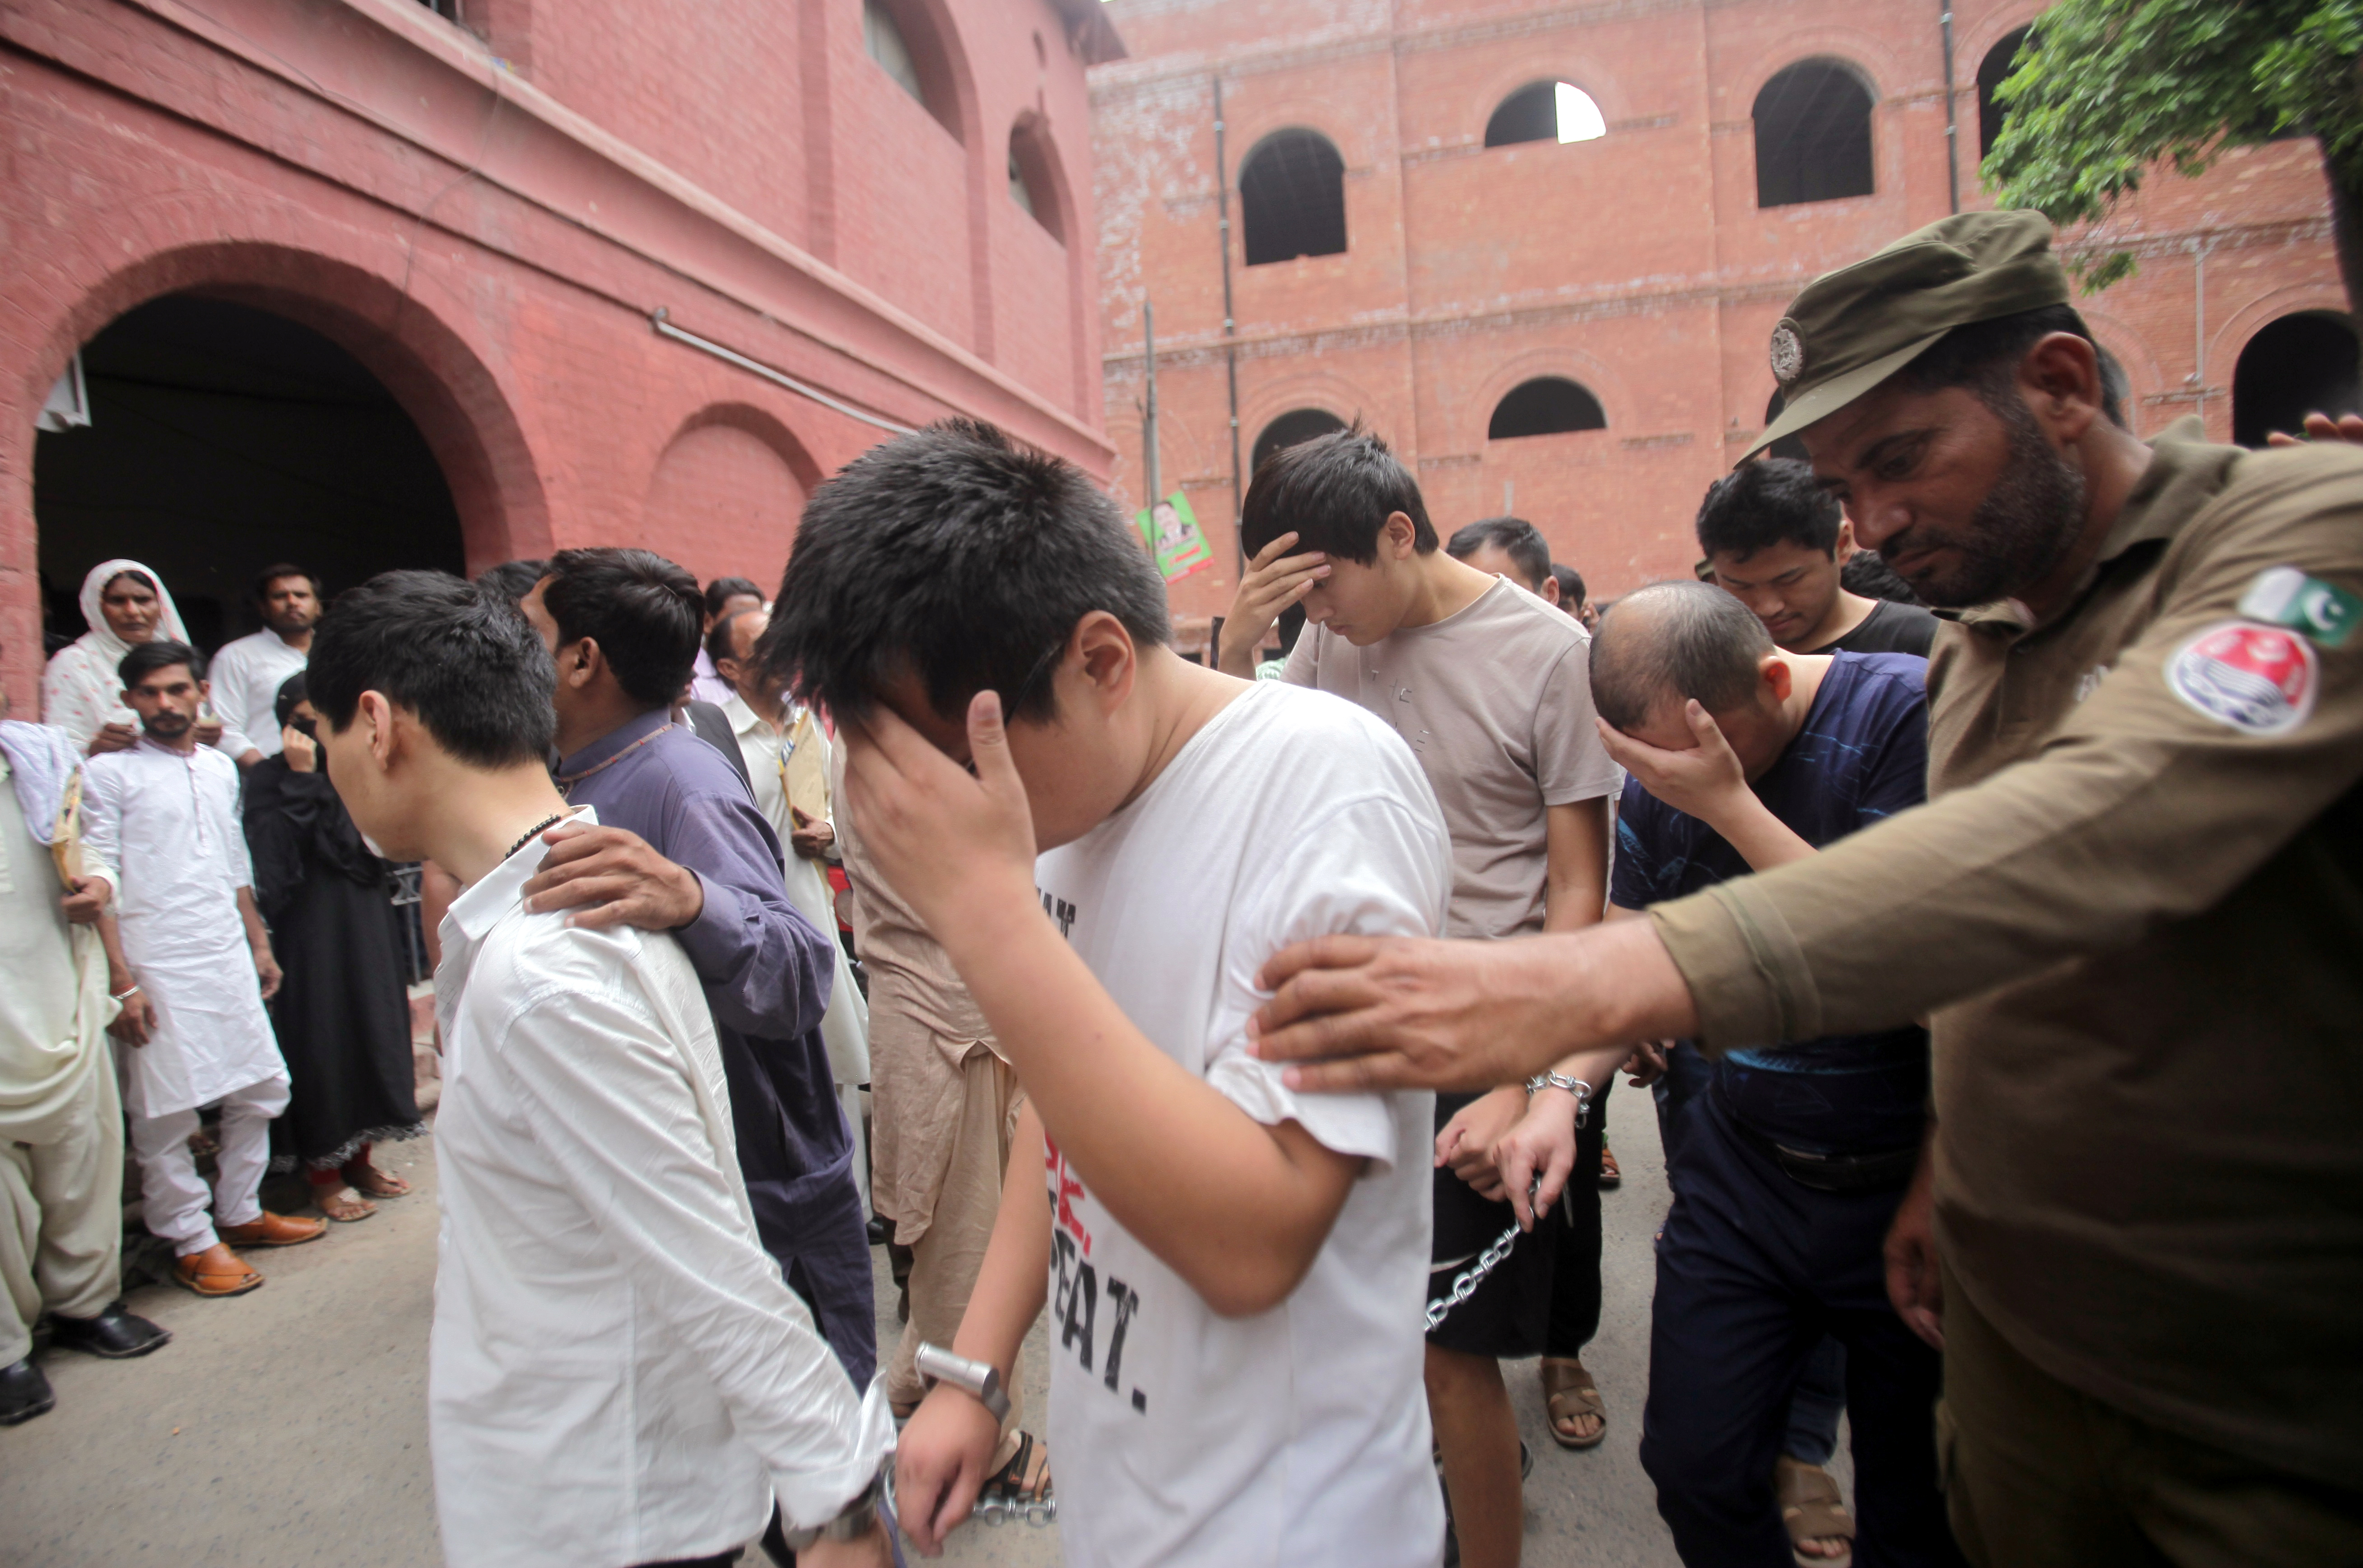 Chinese nationals, who, according to Pakistan Federal Investigation Agency (FIA), are suspected members of a prostitution ring, taking young Pakistani women to China, are escorted by police and officials during their civil court appreance in Lahore, Pakistan May 11, 2019. REUTERS/Mohsin Raza